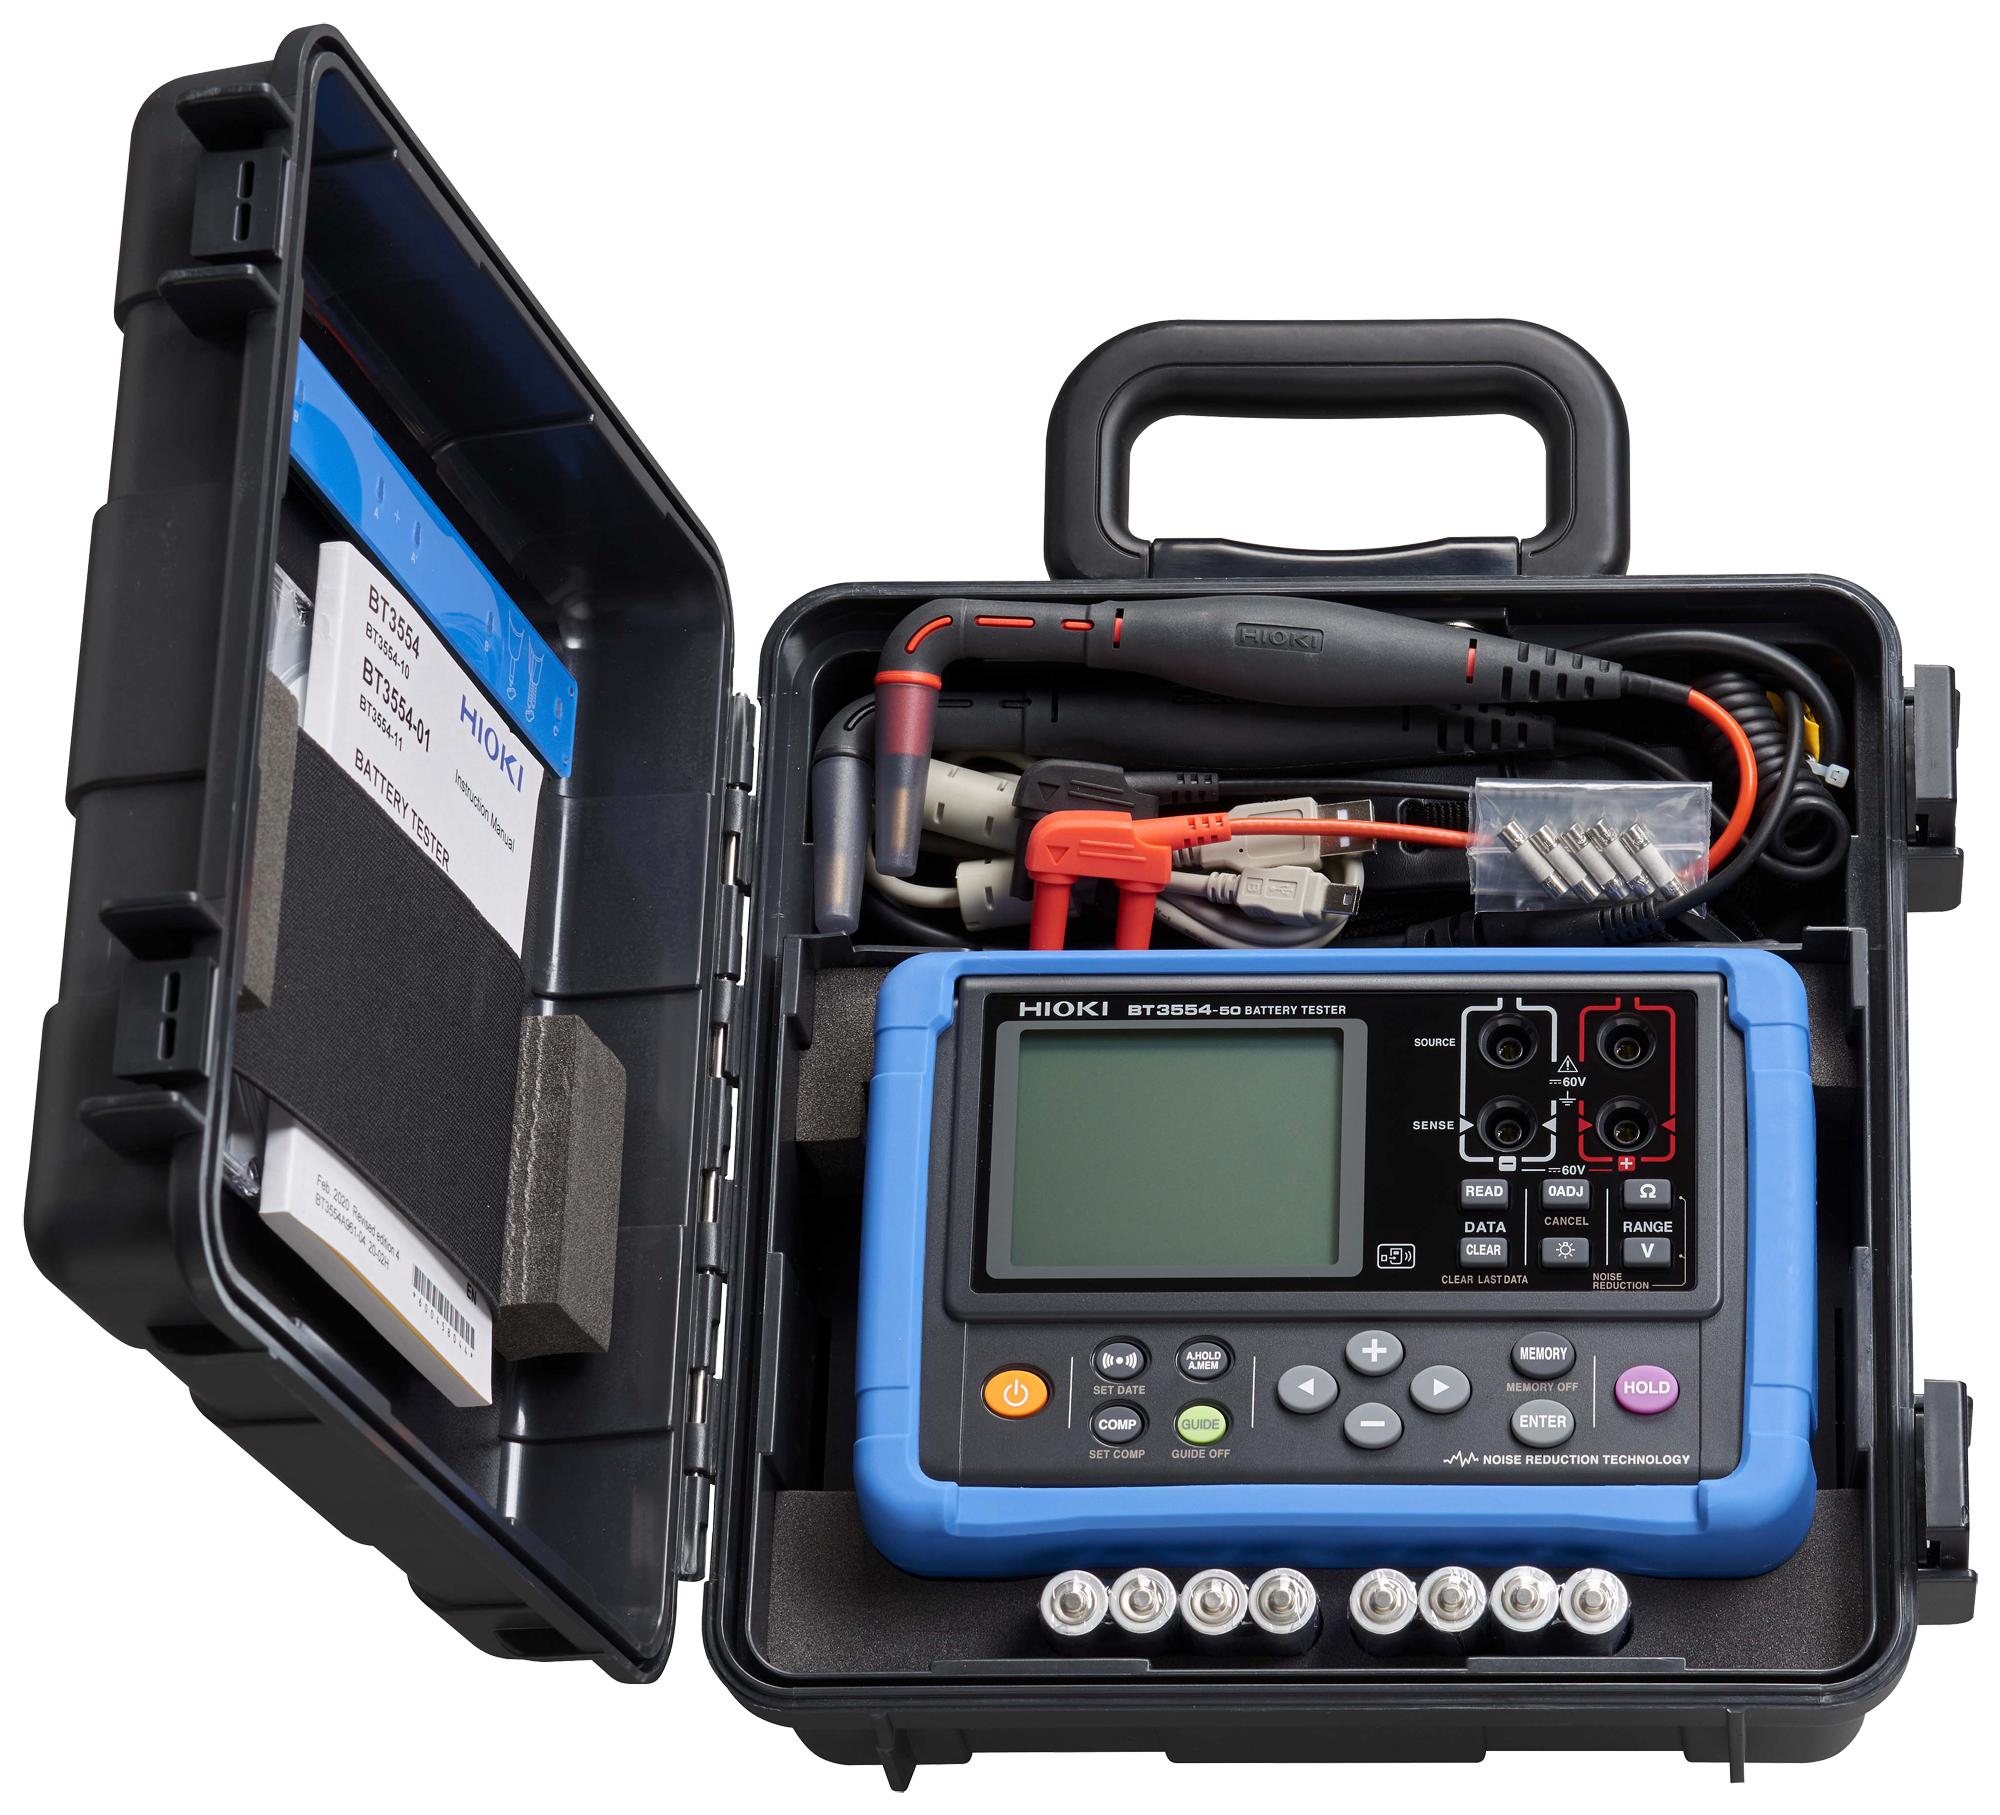 Hioki C1014 Carrying Case, Battery Tester